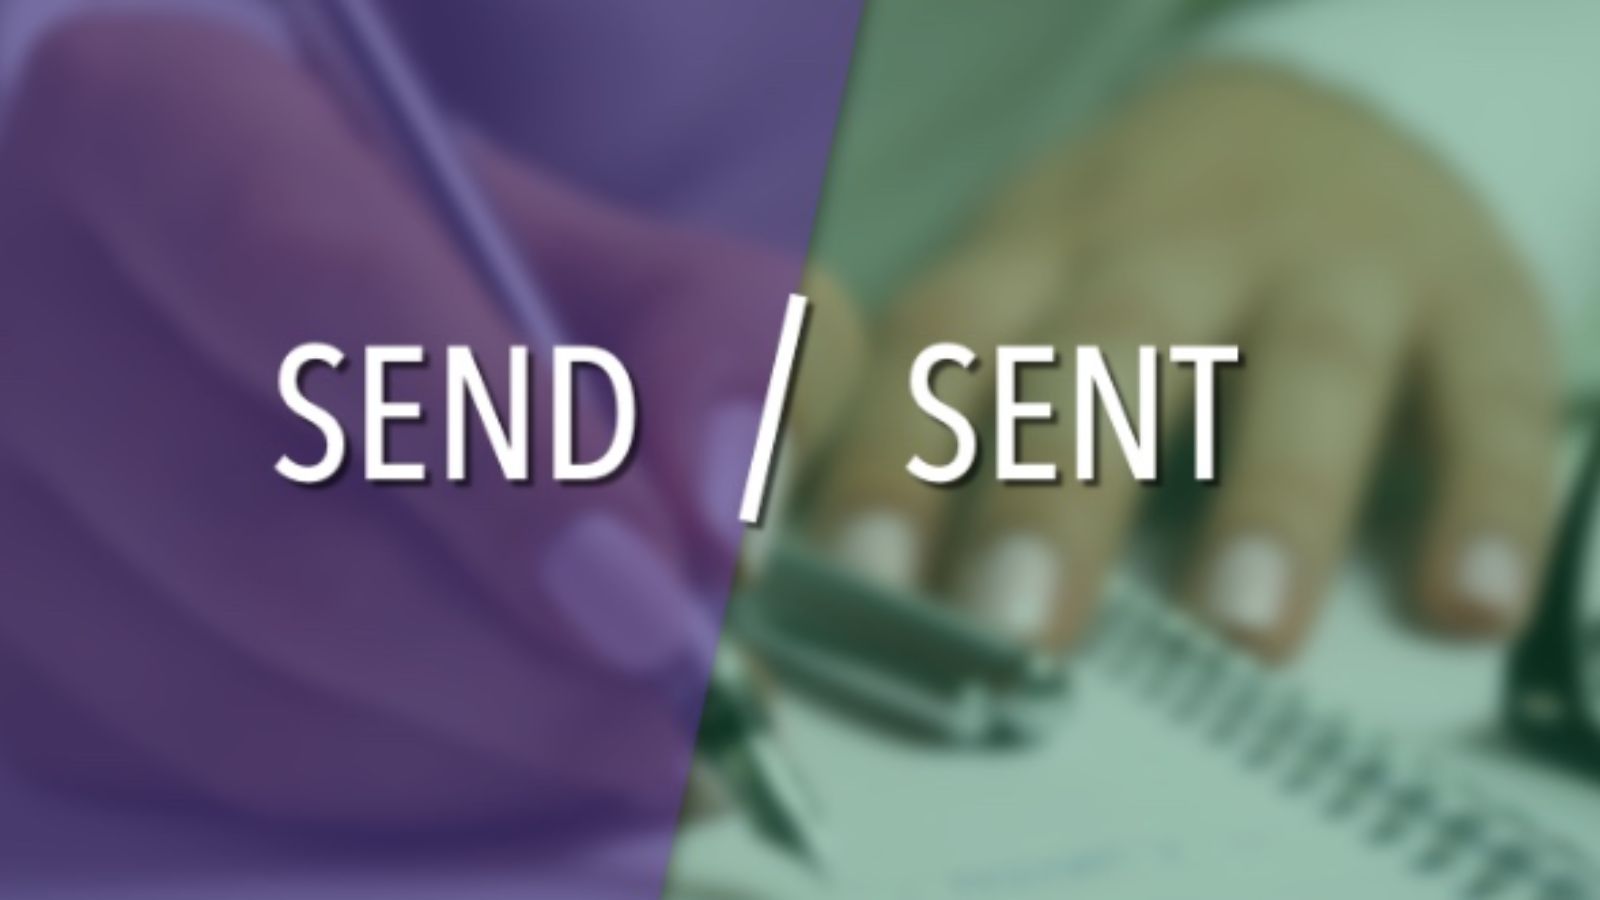 Sent vs Send: Difference between Send and Sent